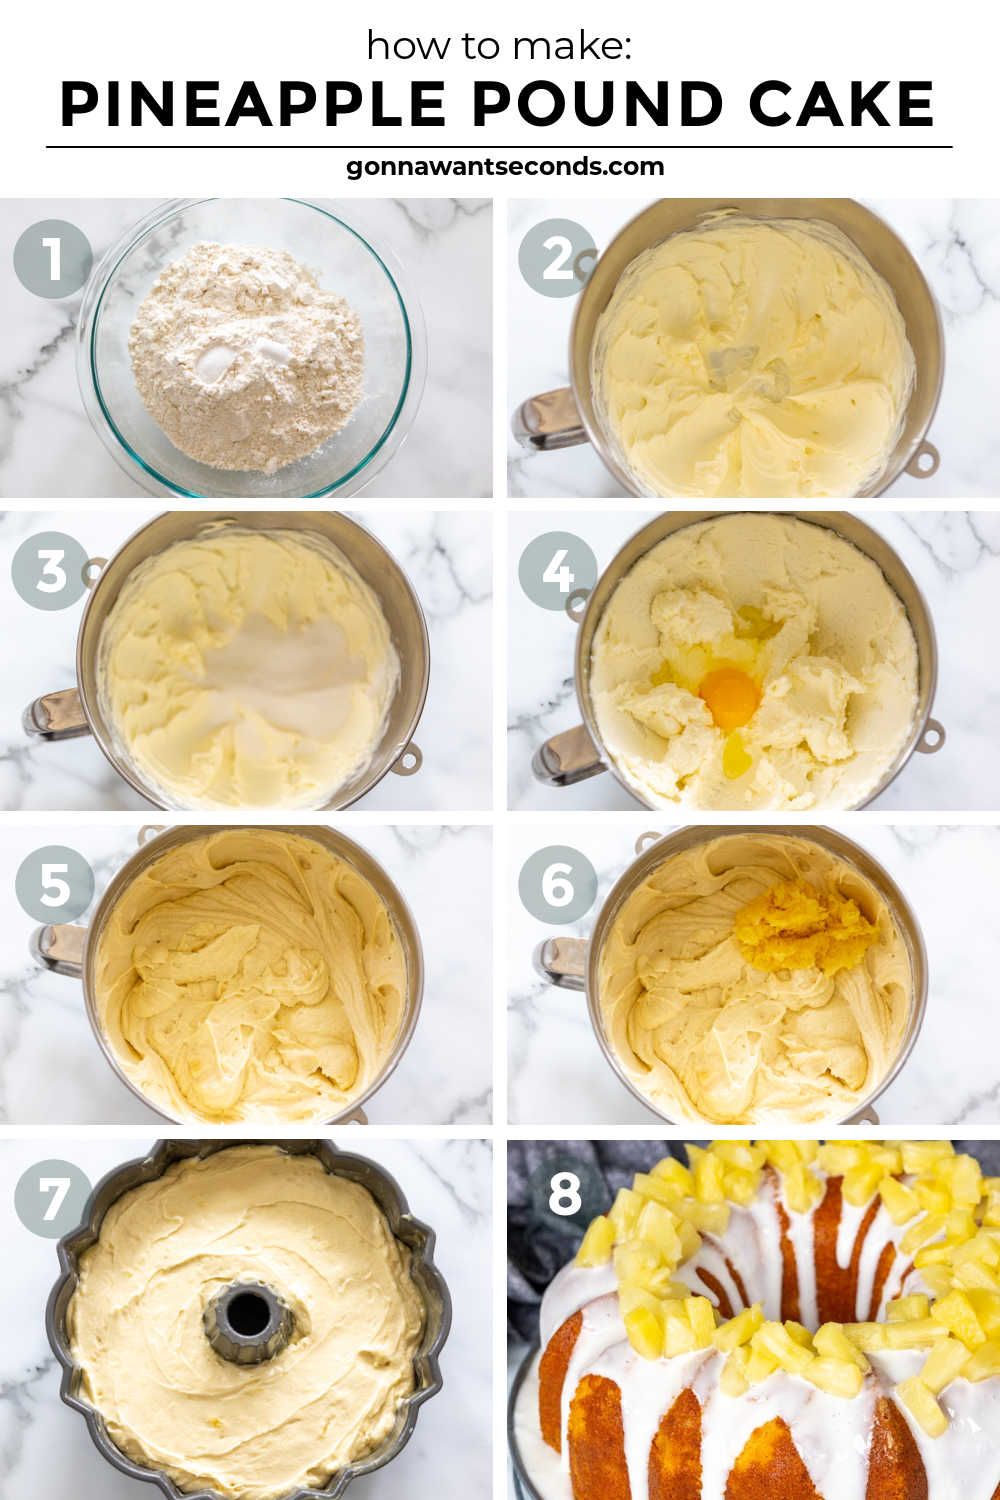 Step by step how to make pineapple pound cake